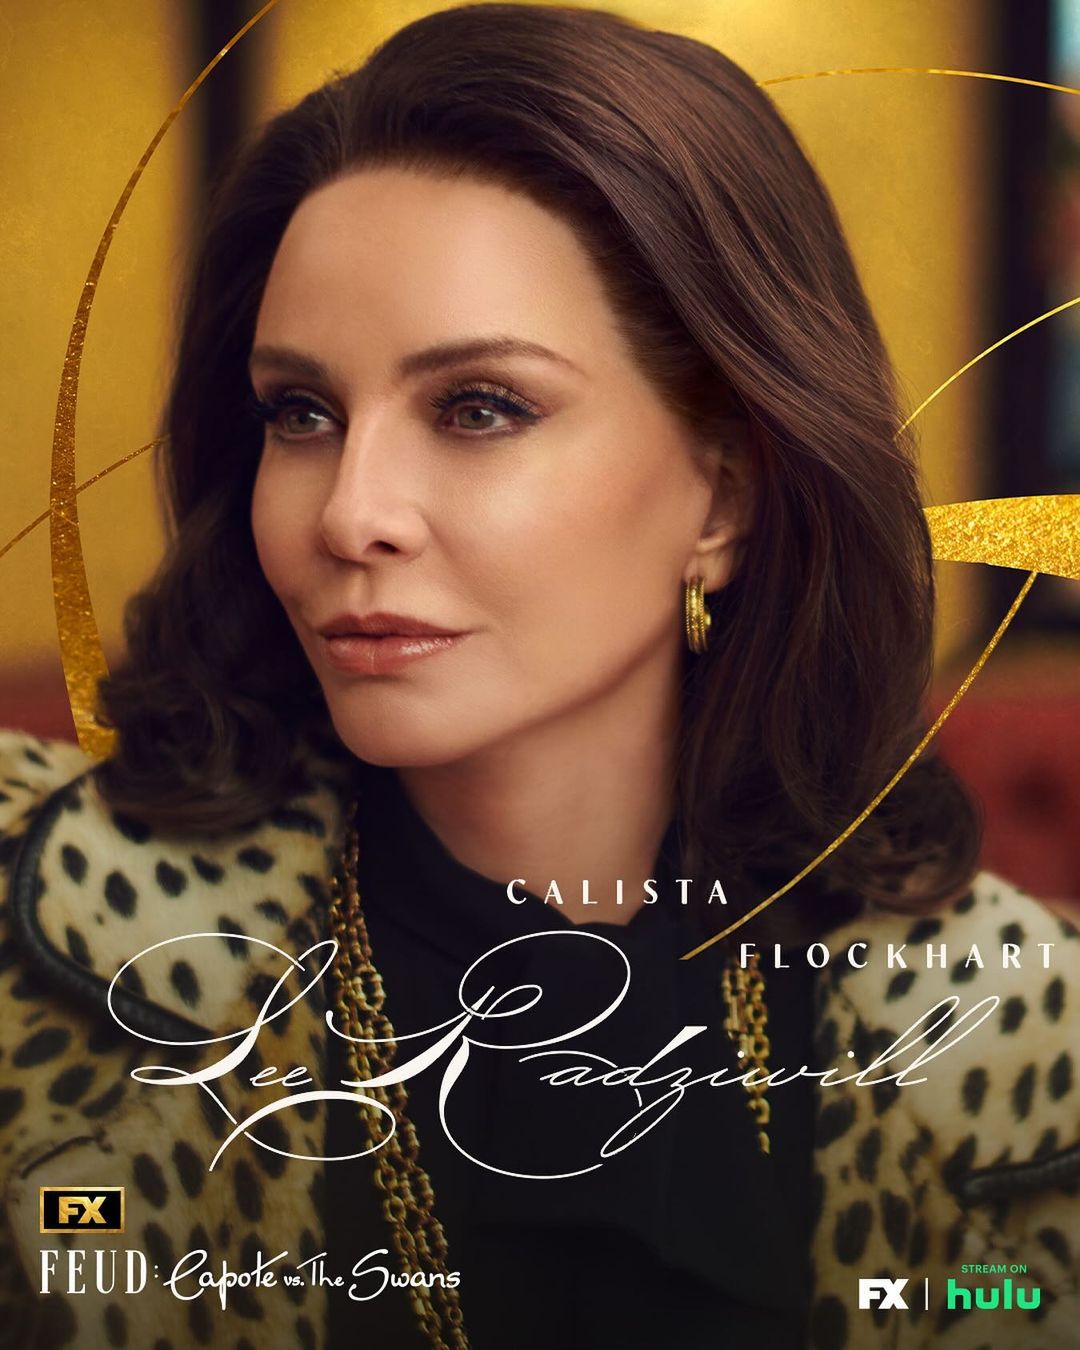 Calista Flockhart plays Lee Radziwill in "FEUD: Capote vs. The Swans"